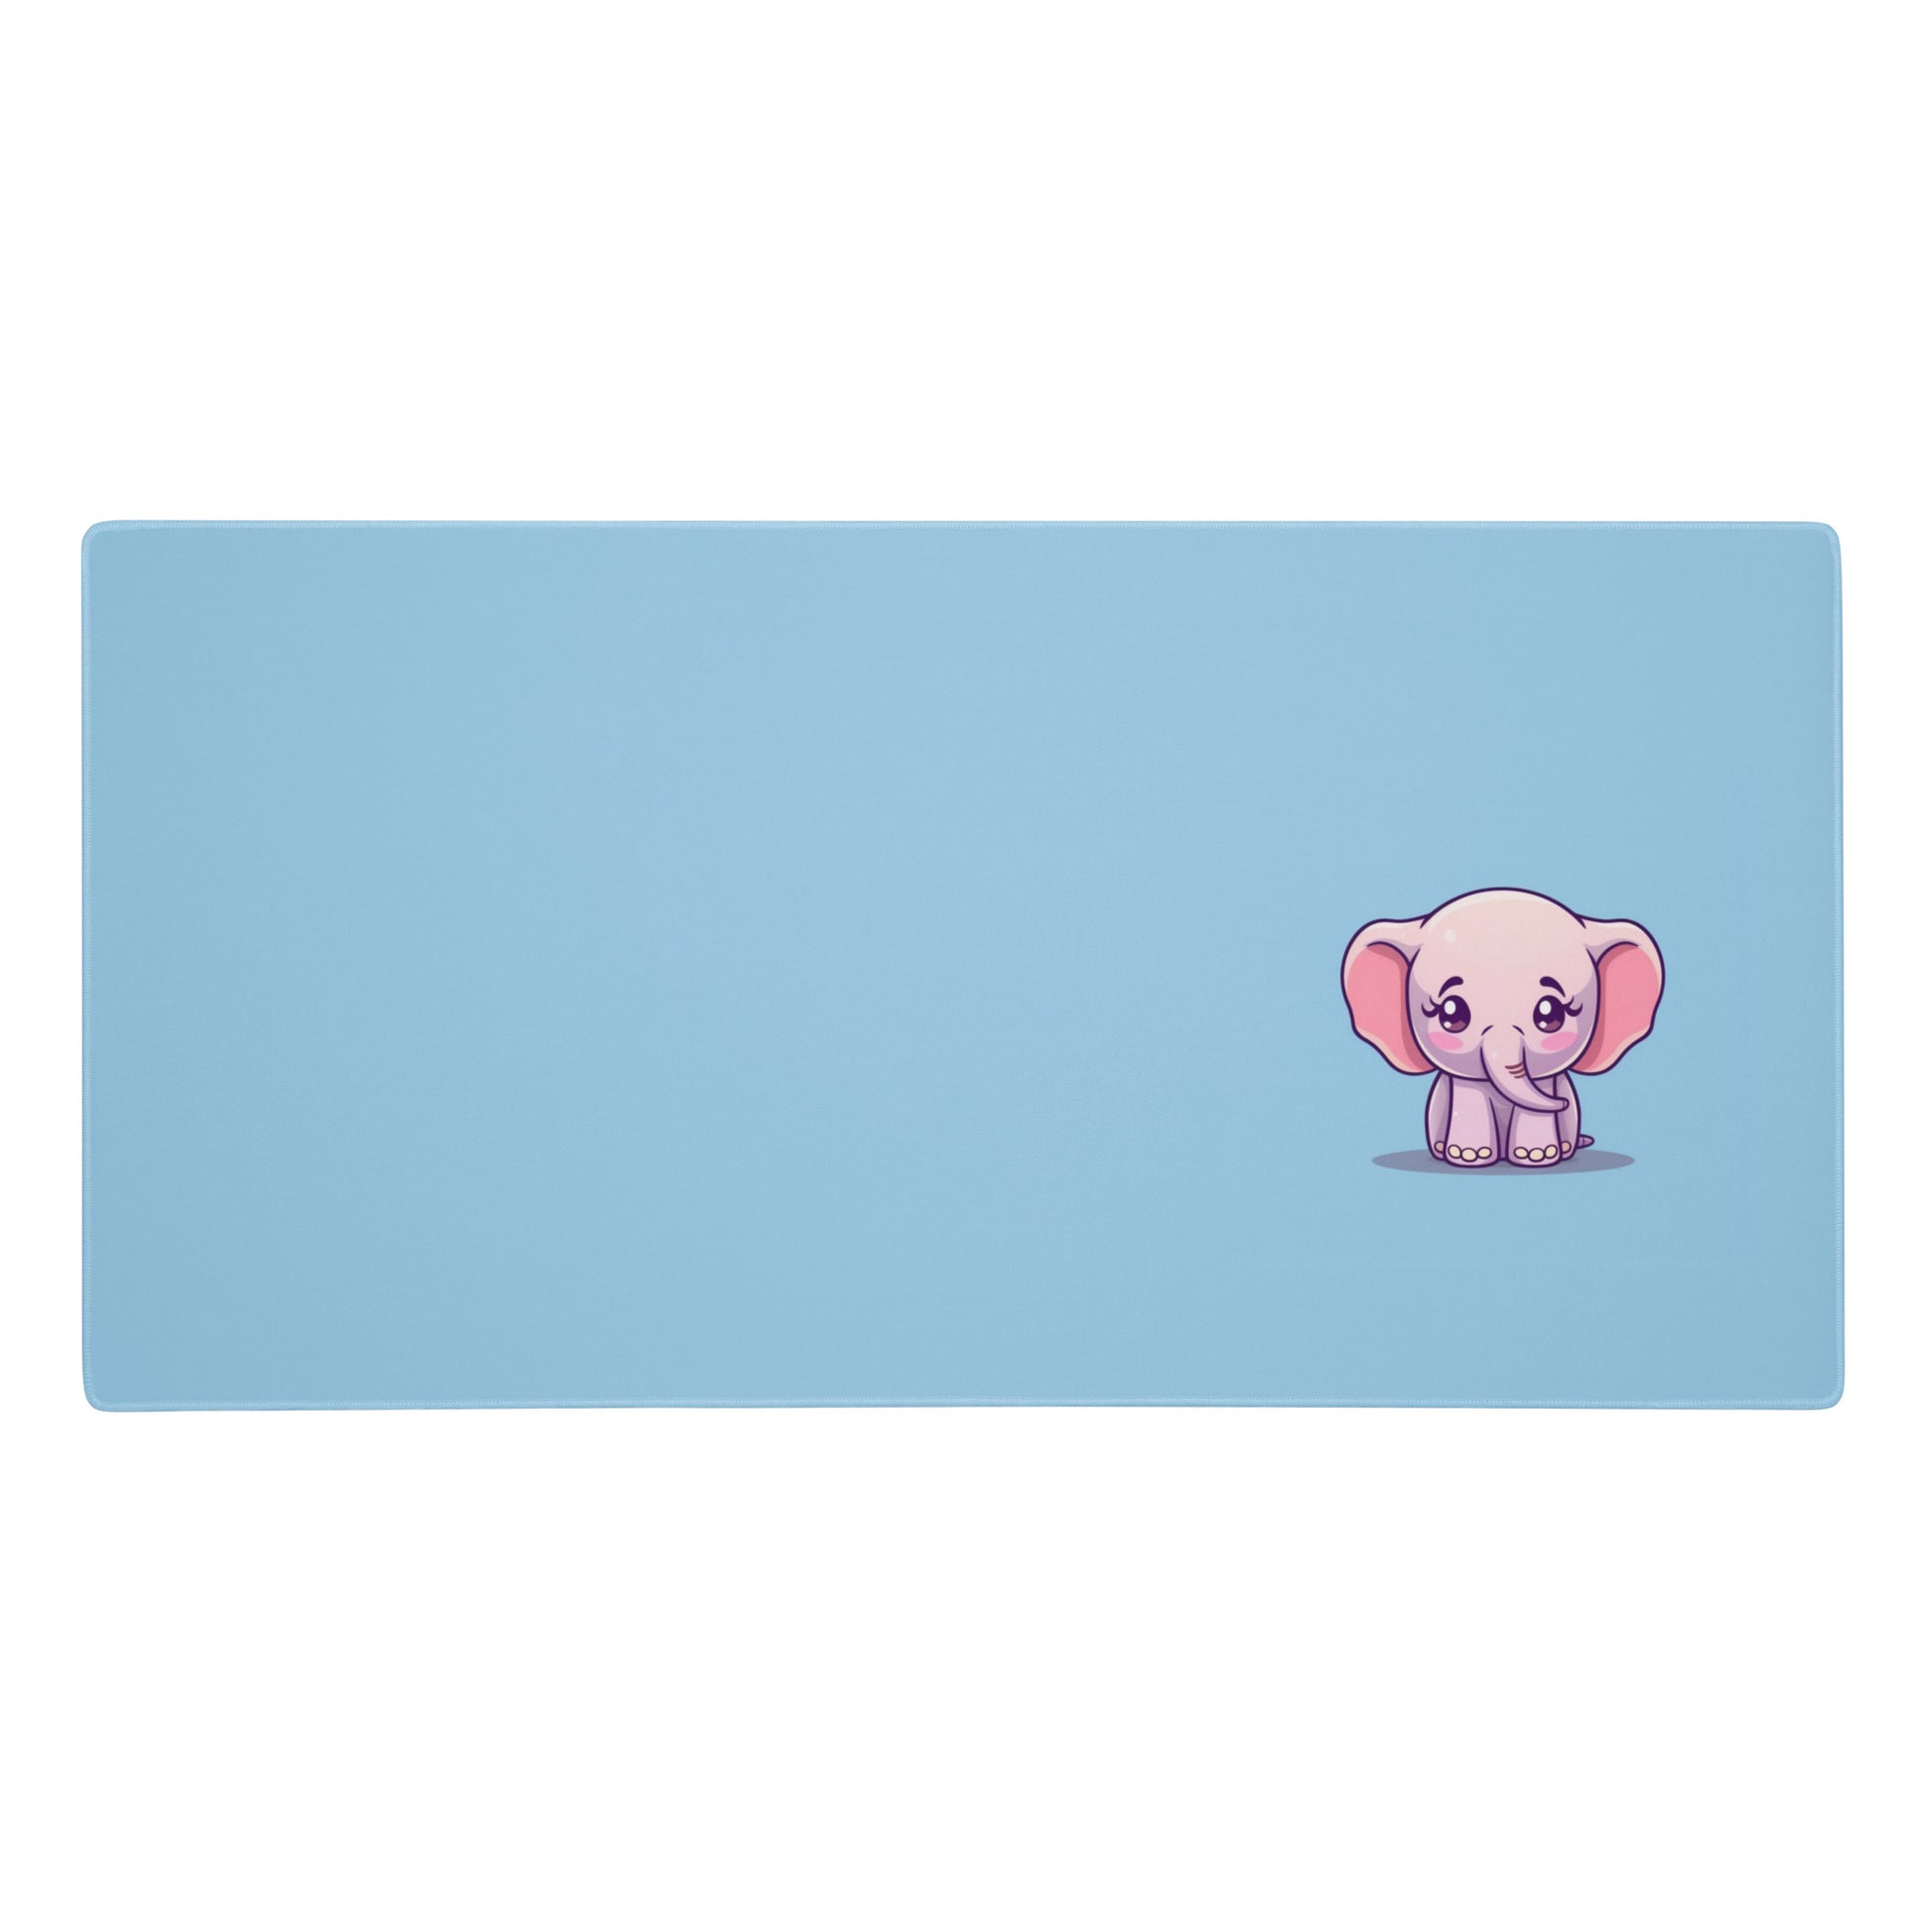 A 36" x 18" desk pad with a cute elephant on it. Blue in color.